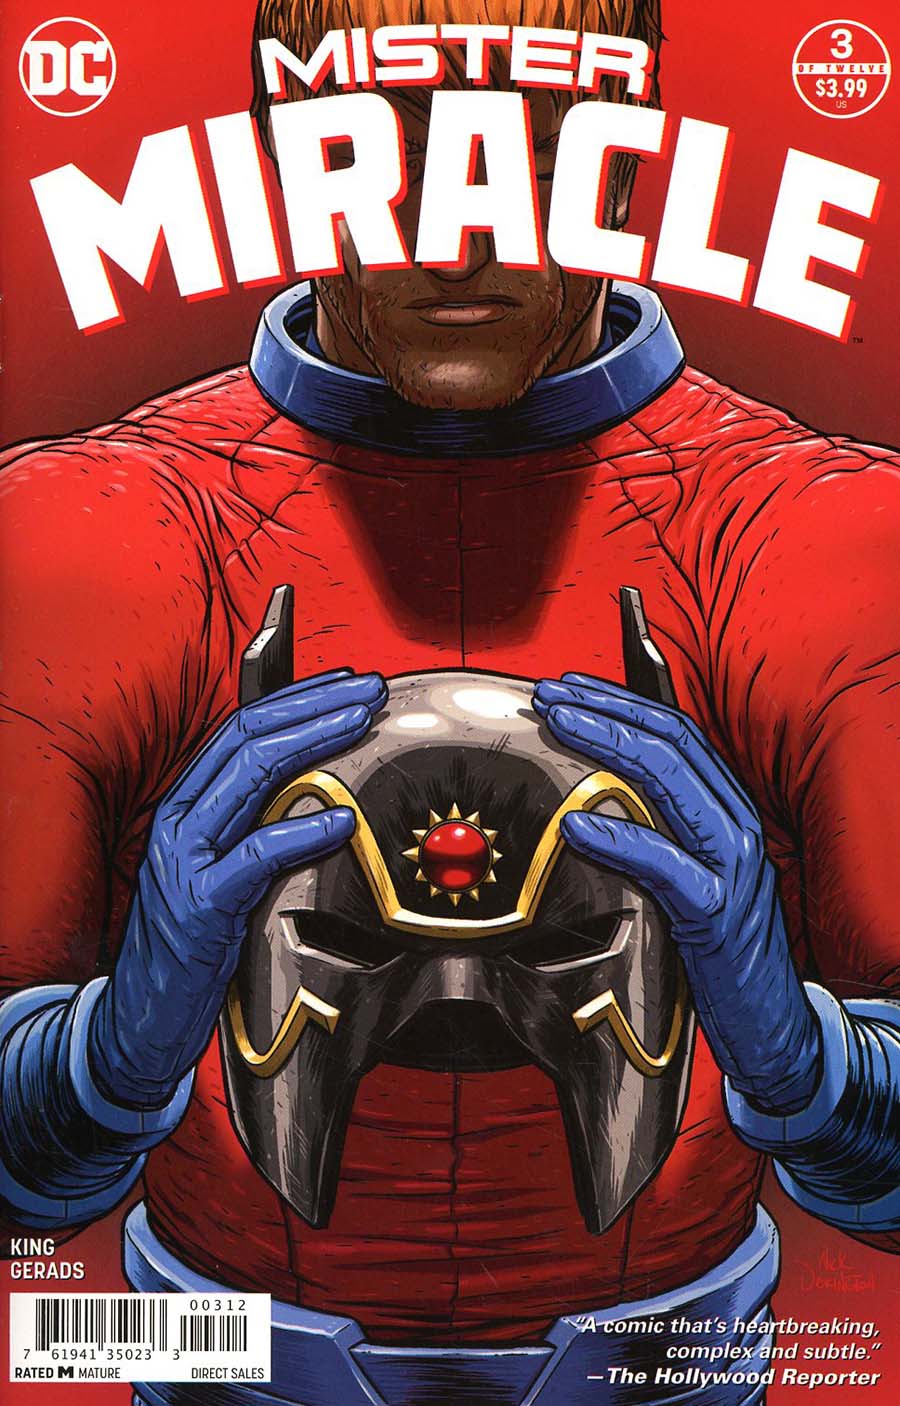 Mister Miracle Vol 4 #3 Cover C 2nd Ptg Variant Nick Derrington Cover